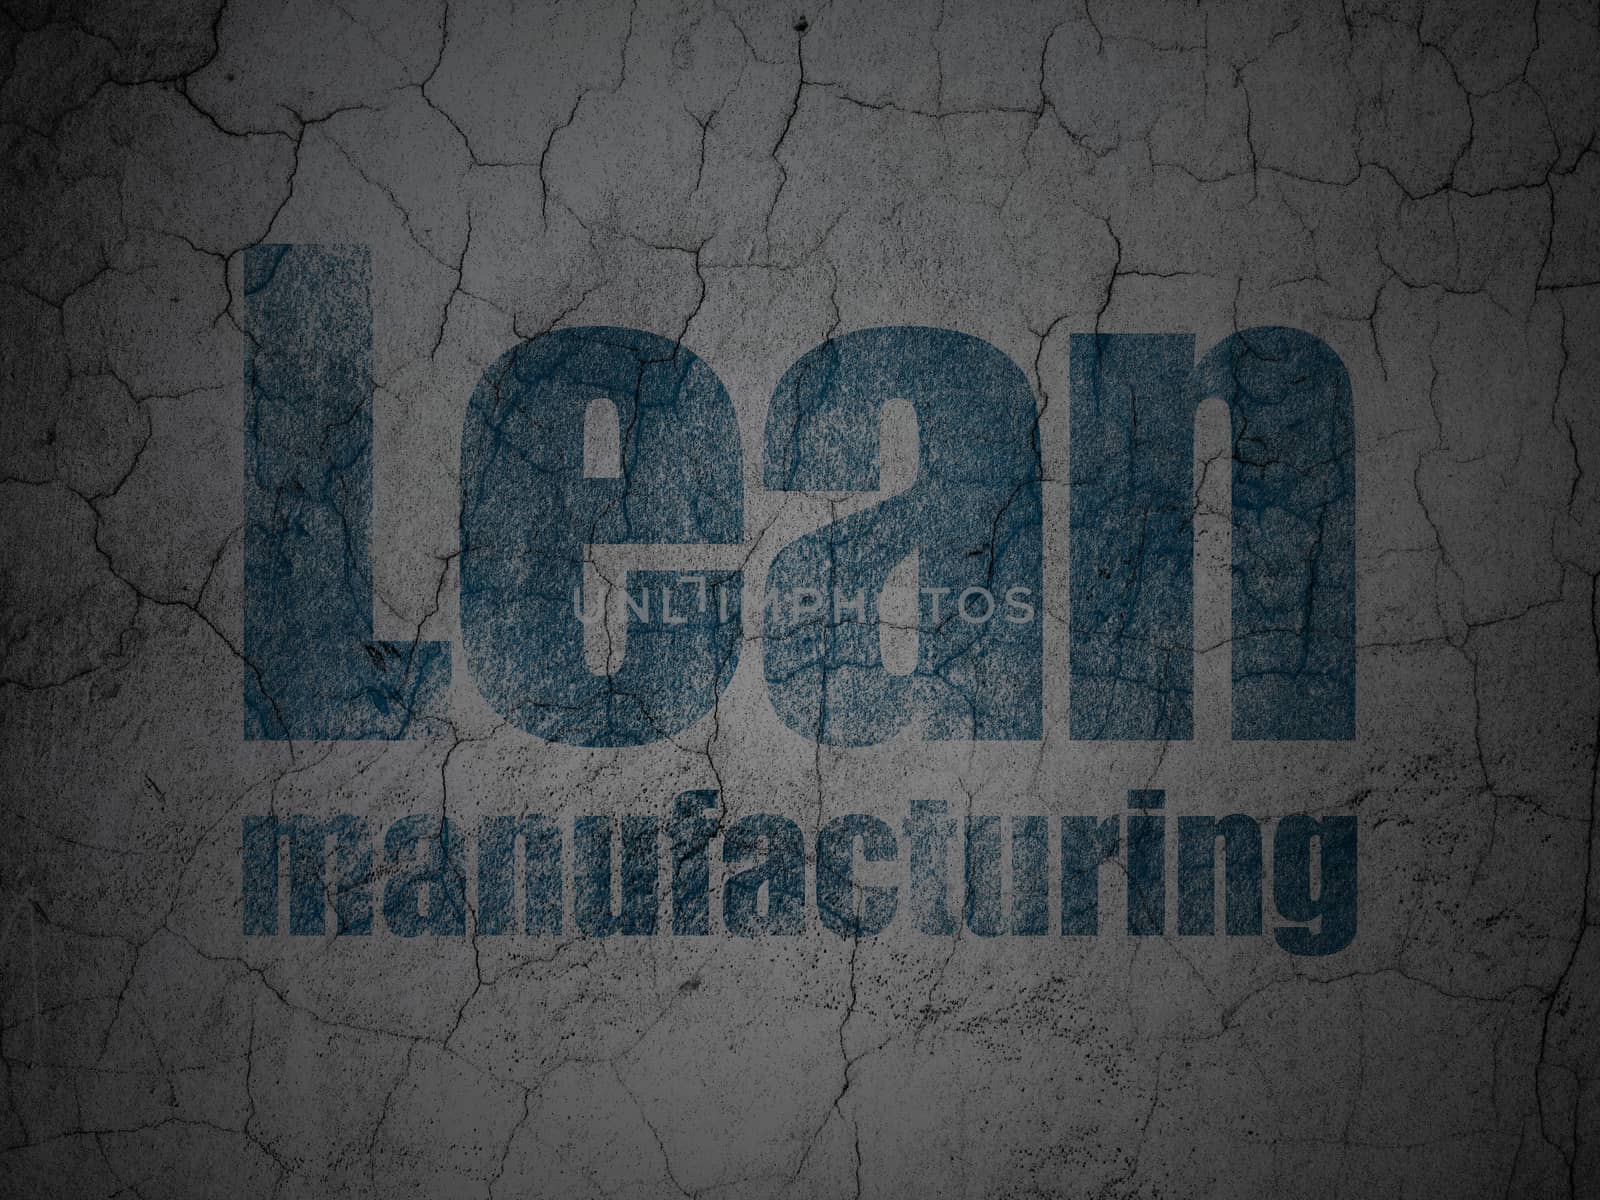 Manufacuring concept: Blue Lean Manufacturing on grunge textured concrete wall background